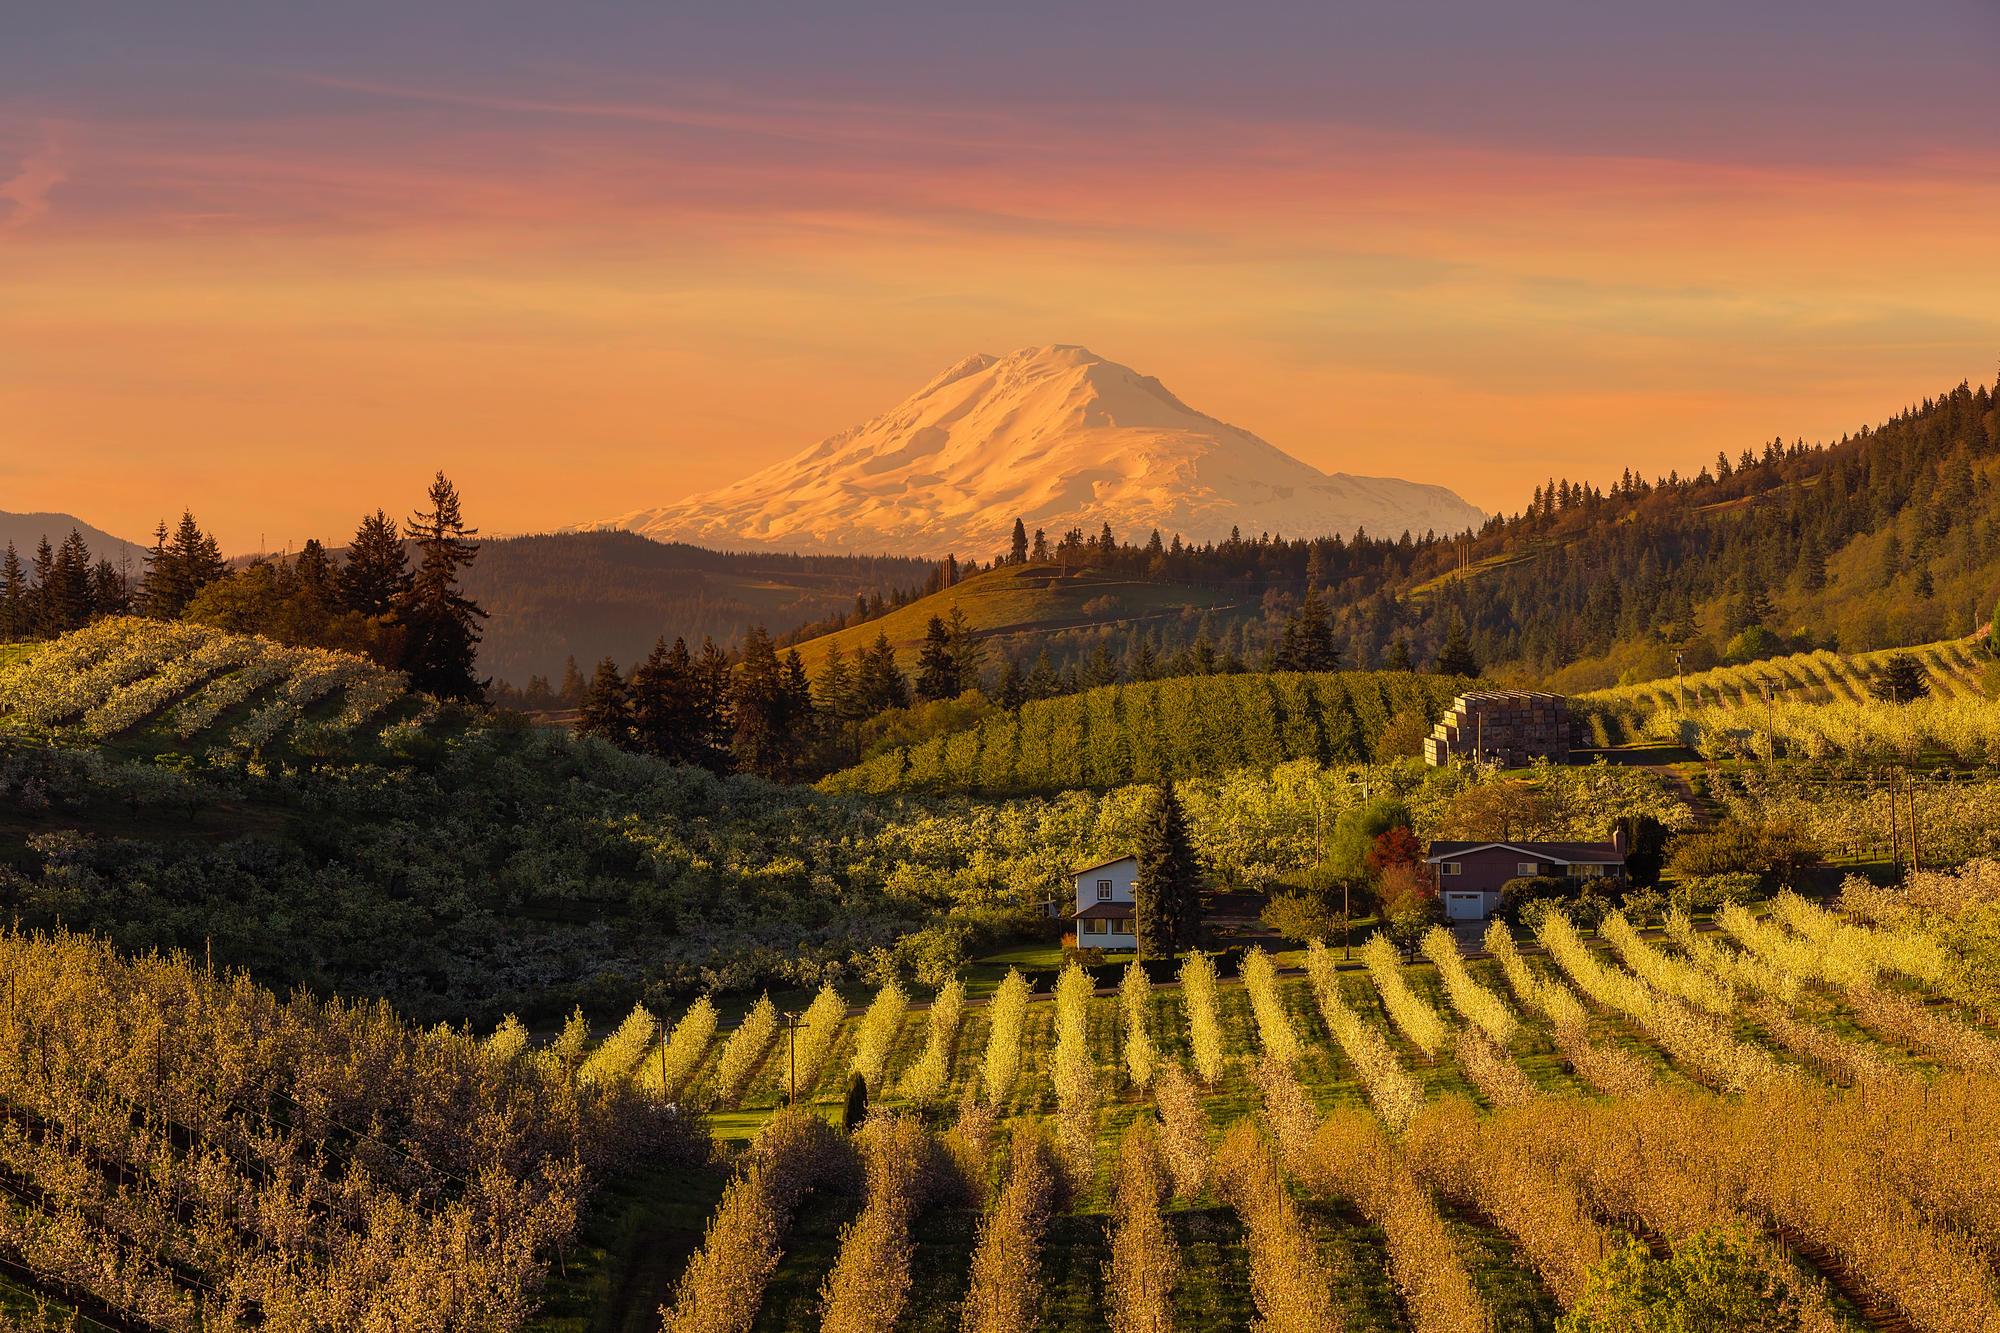 sunset view of Mount Hood with orchards in foreground